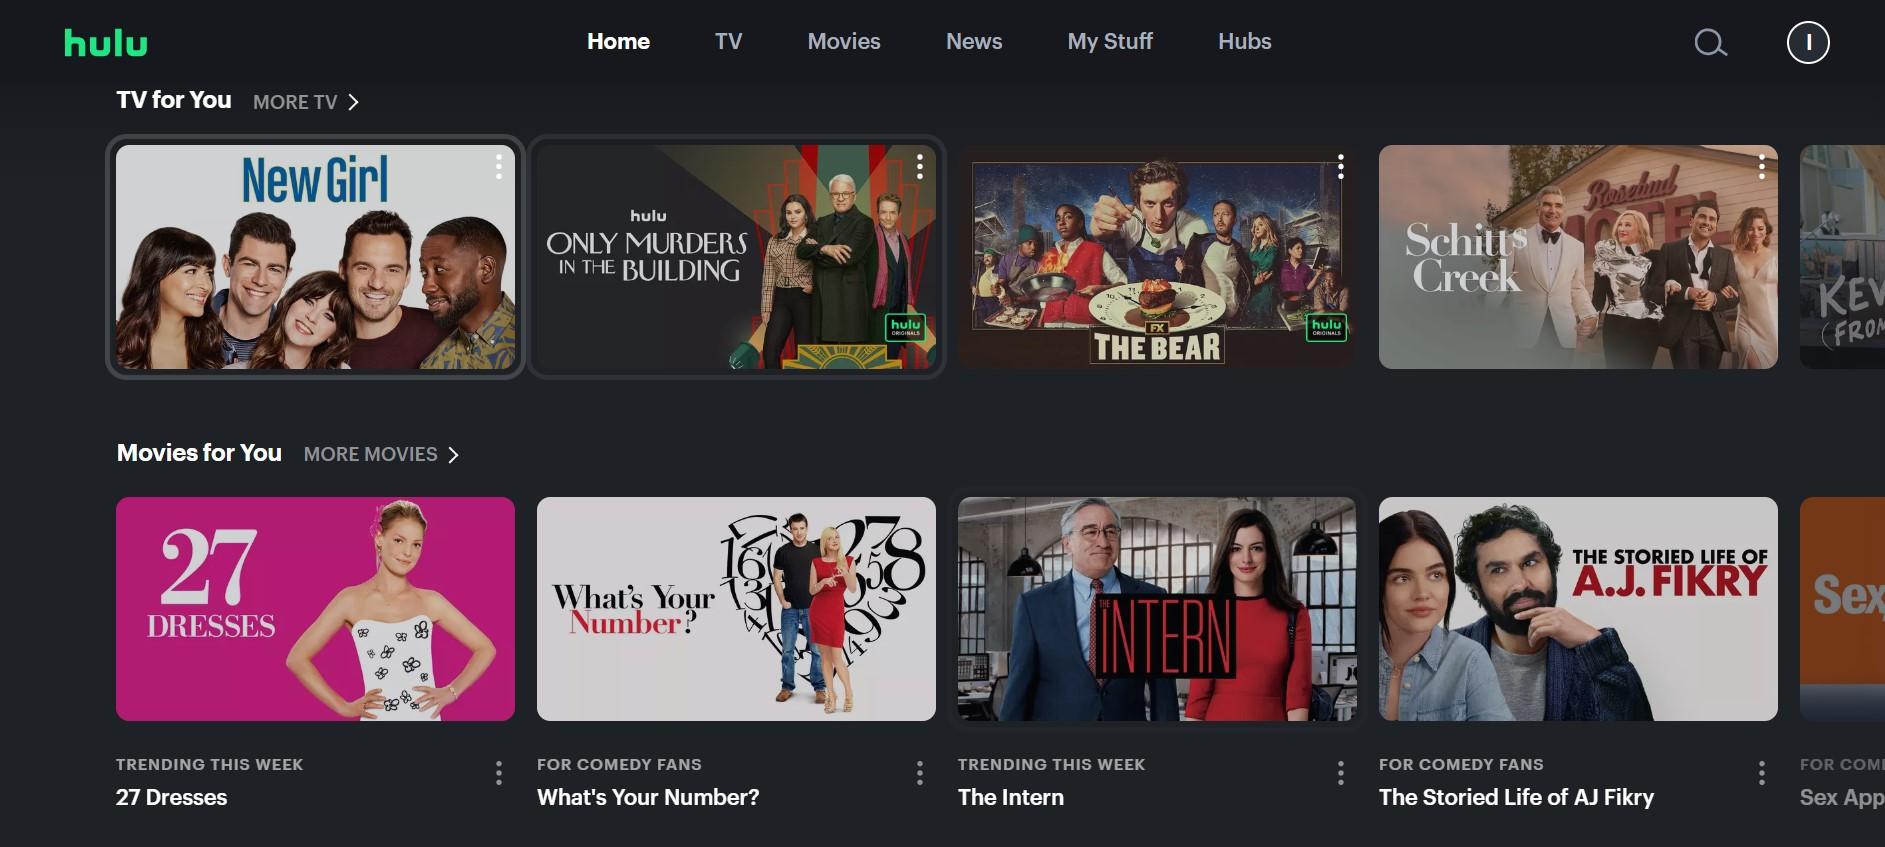 Hulu in Thailand - tv shows and movies